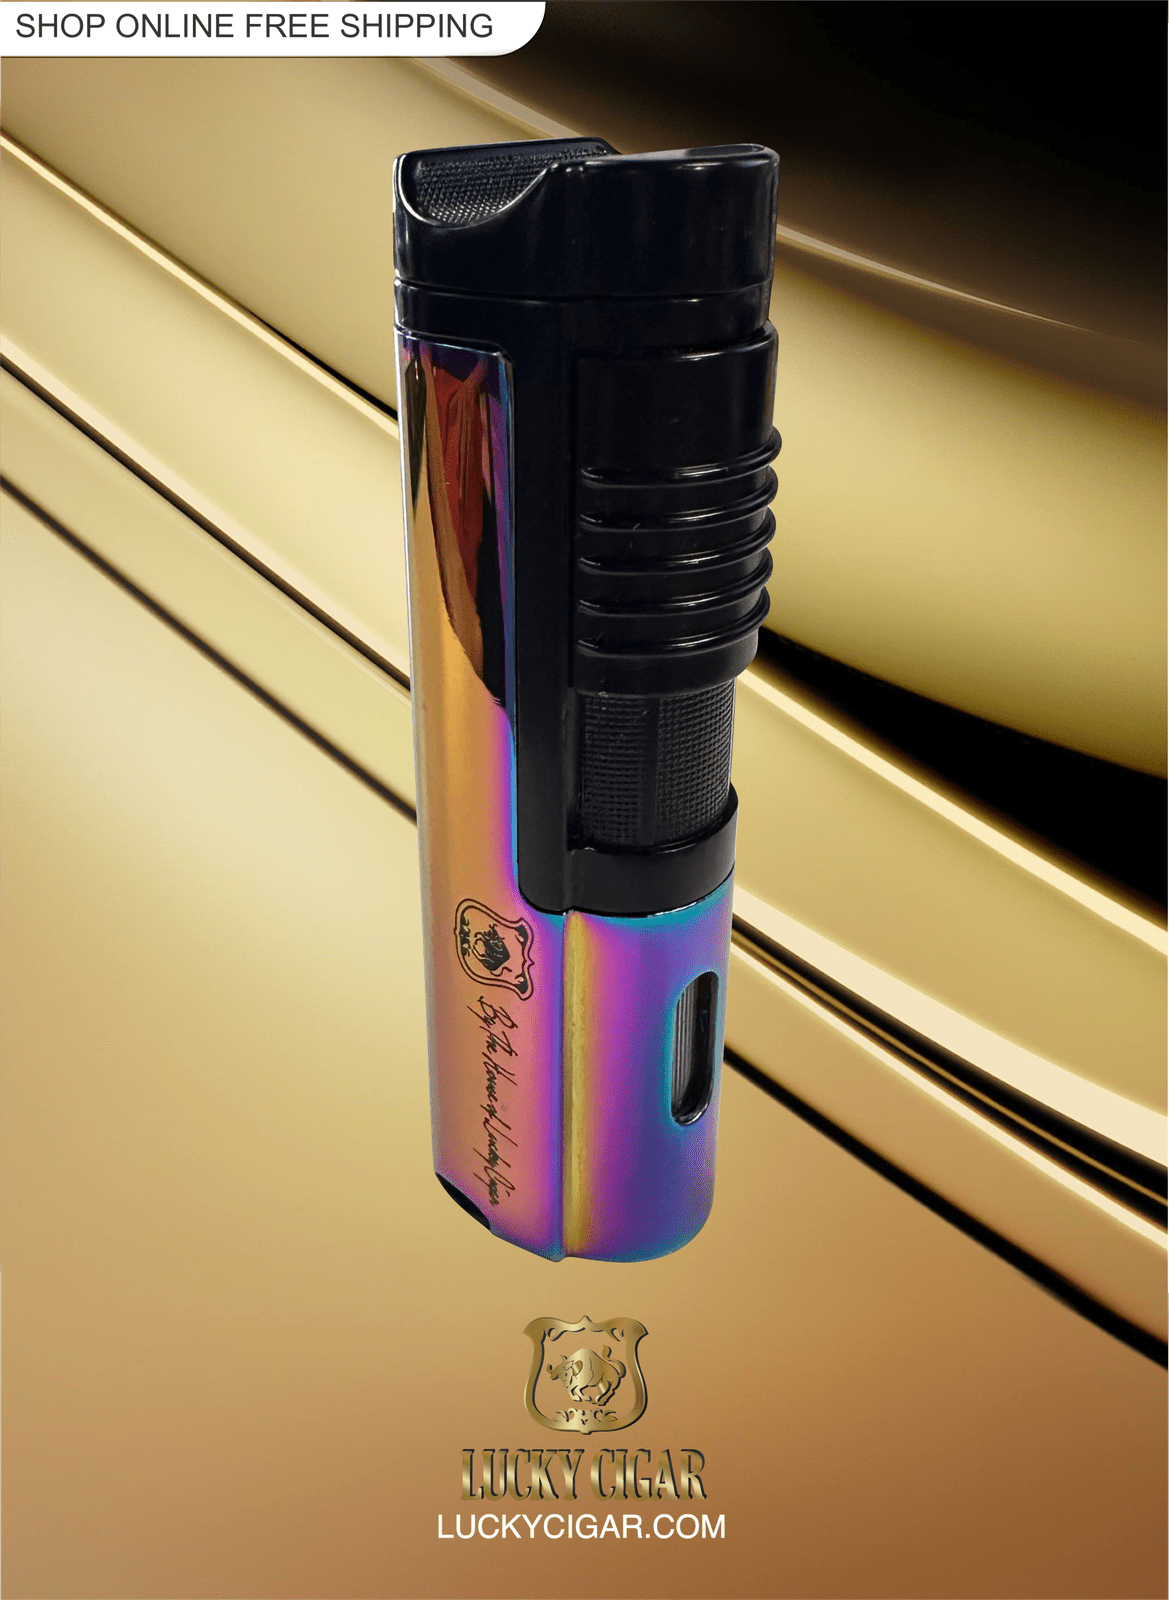 Cigar Lifestyle Accessories: Torch Lighter in Multicolor